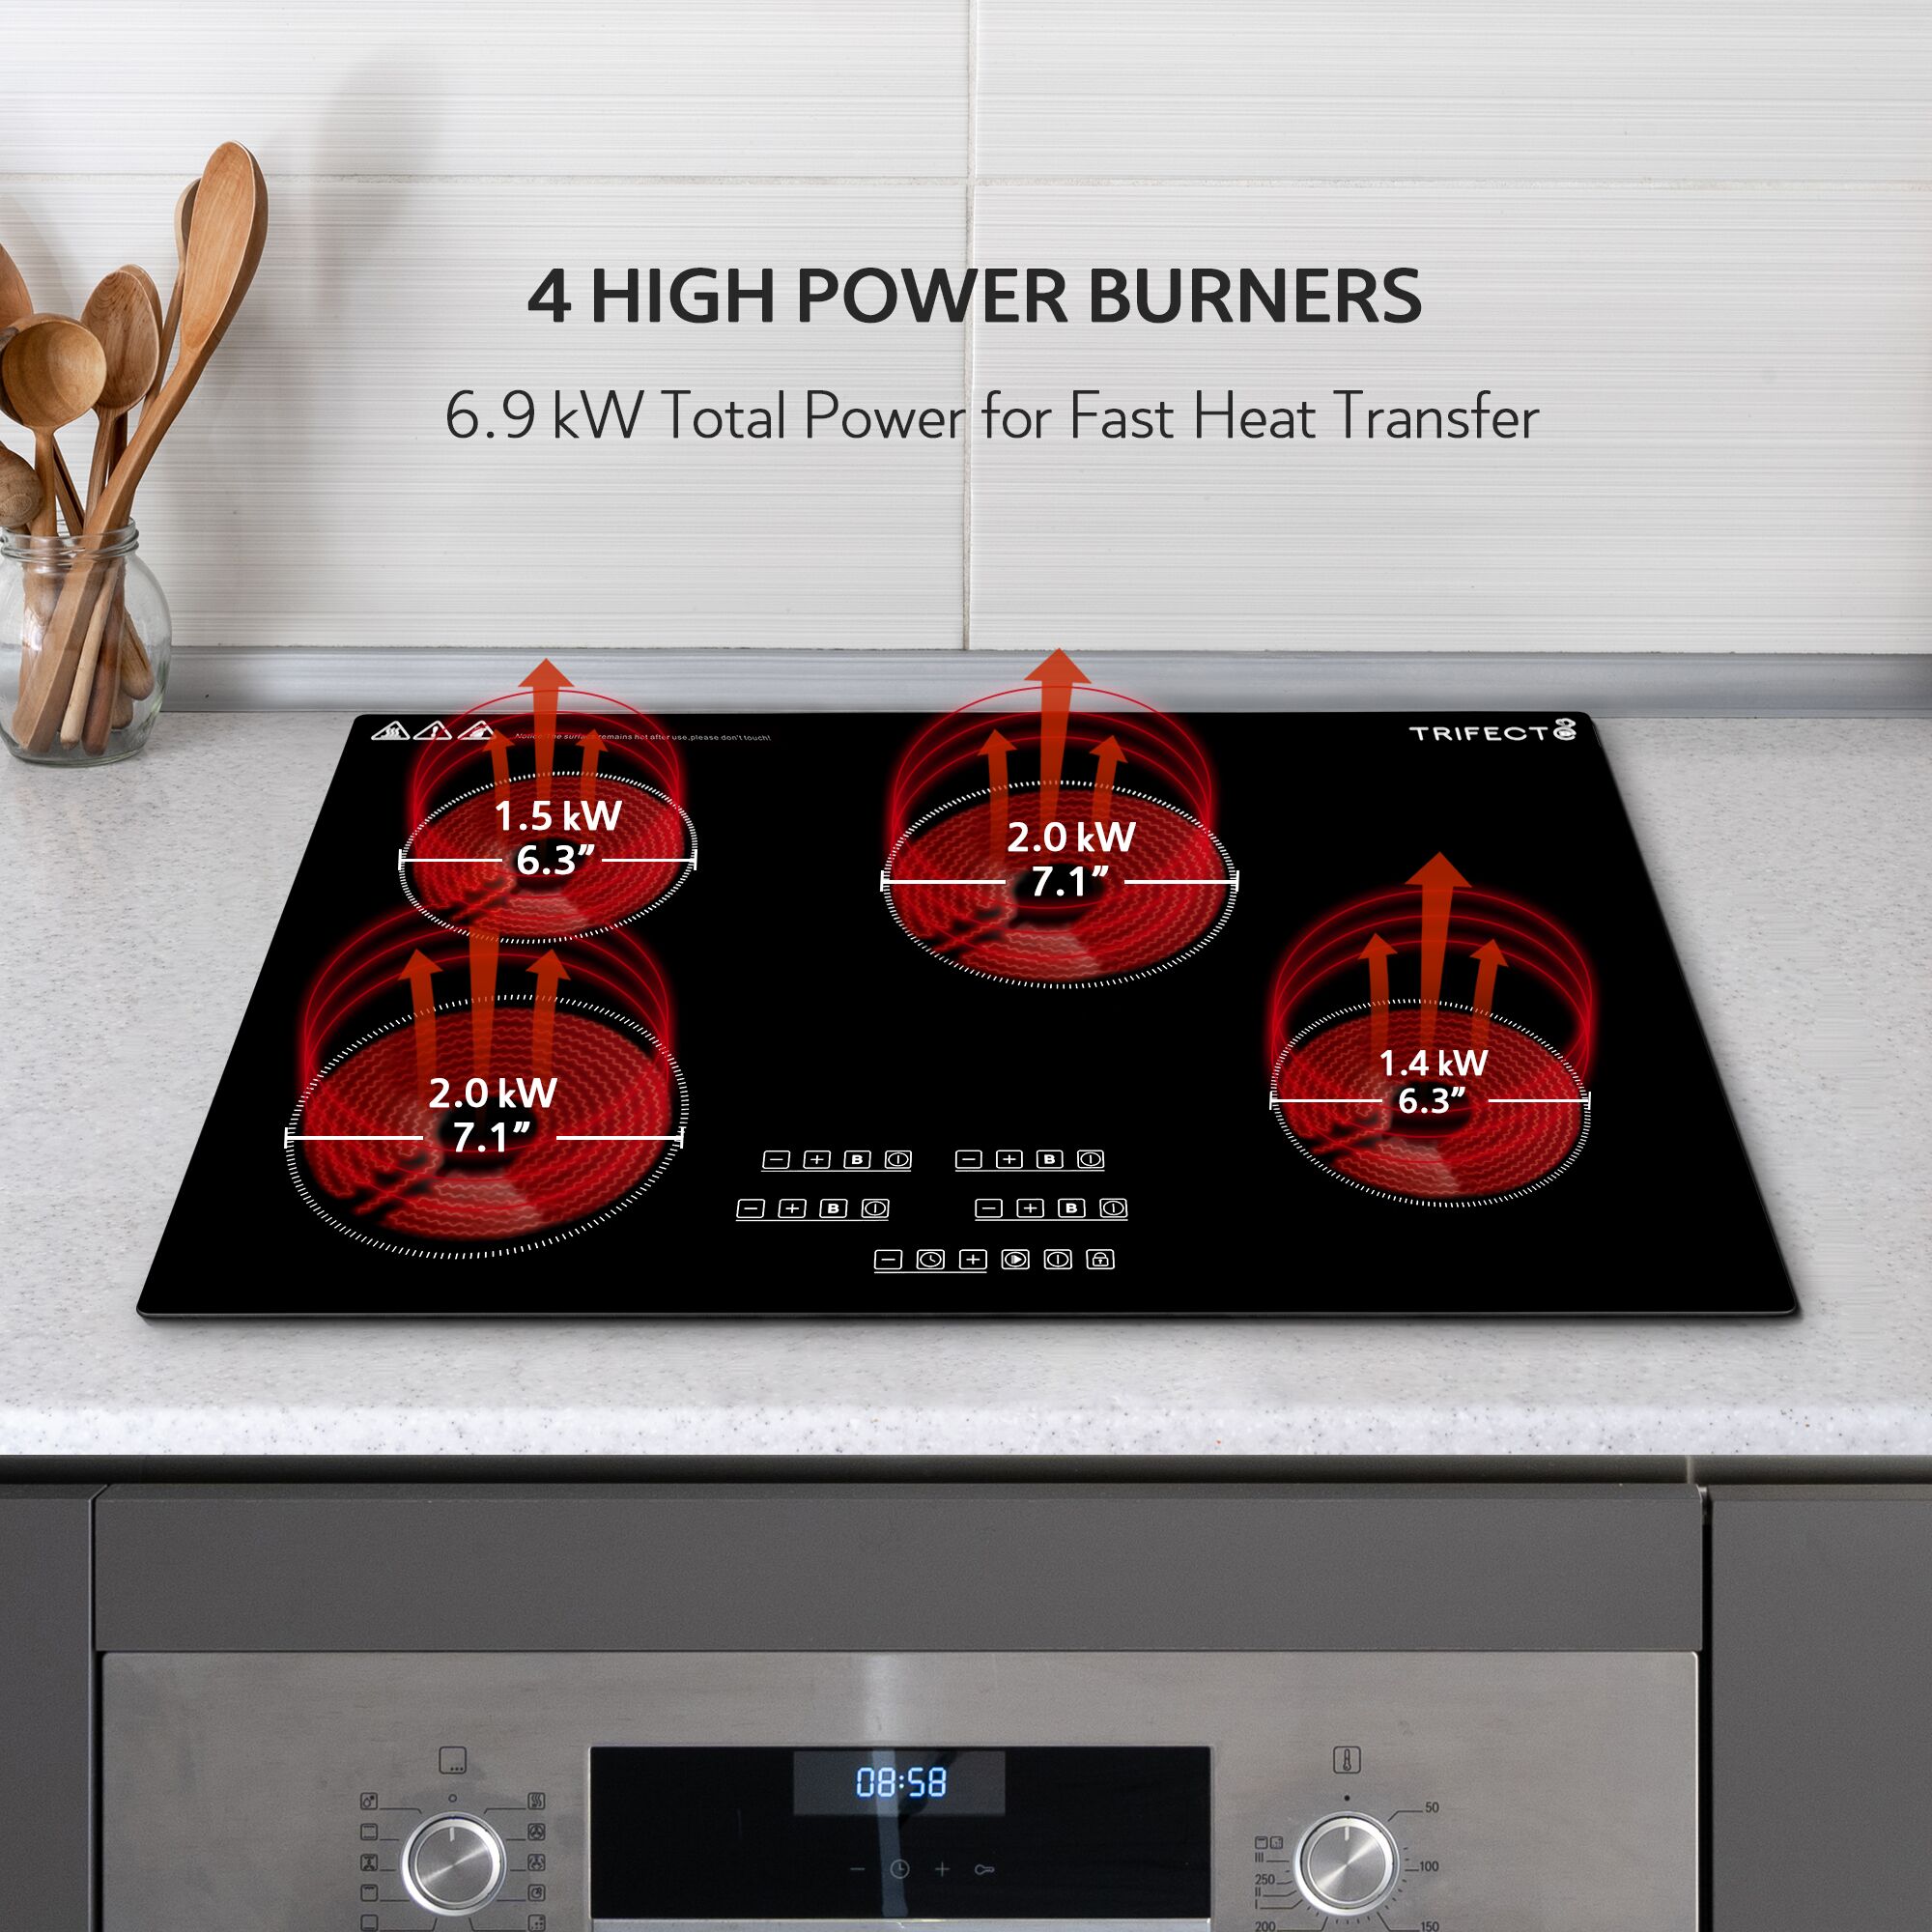 30 Cooktops, Induction, Gas & Electric Cooktops